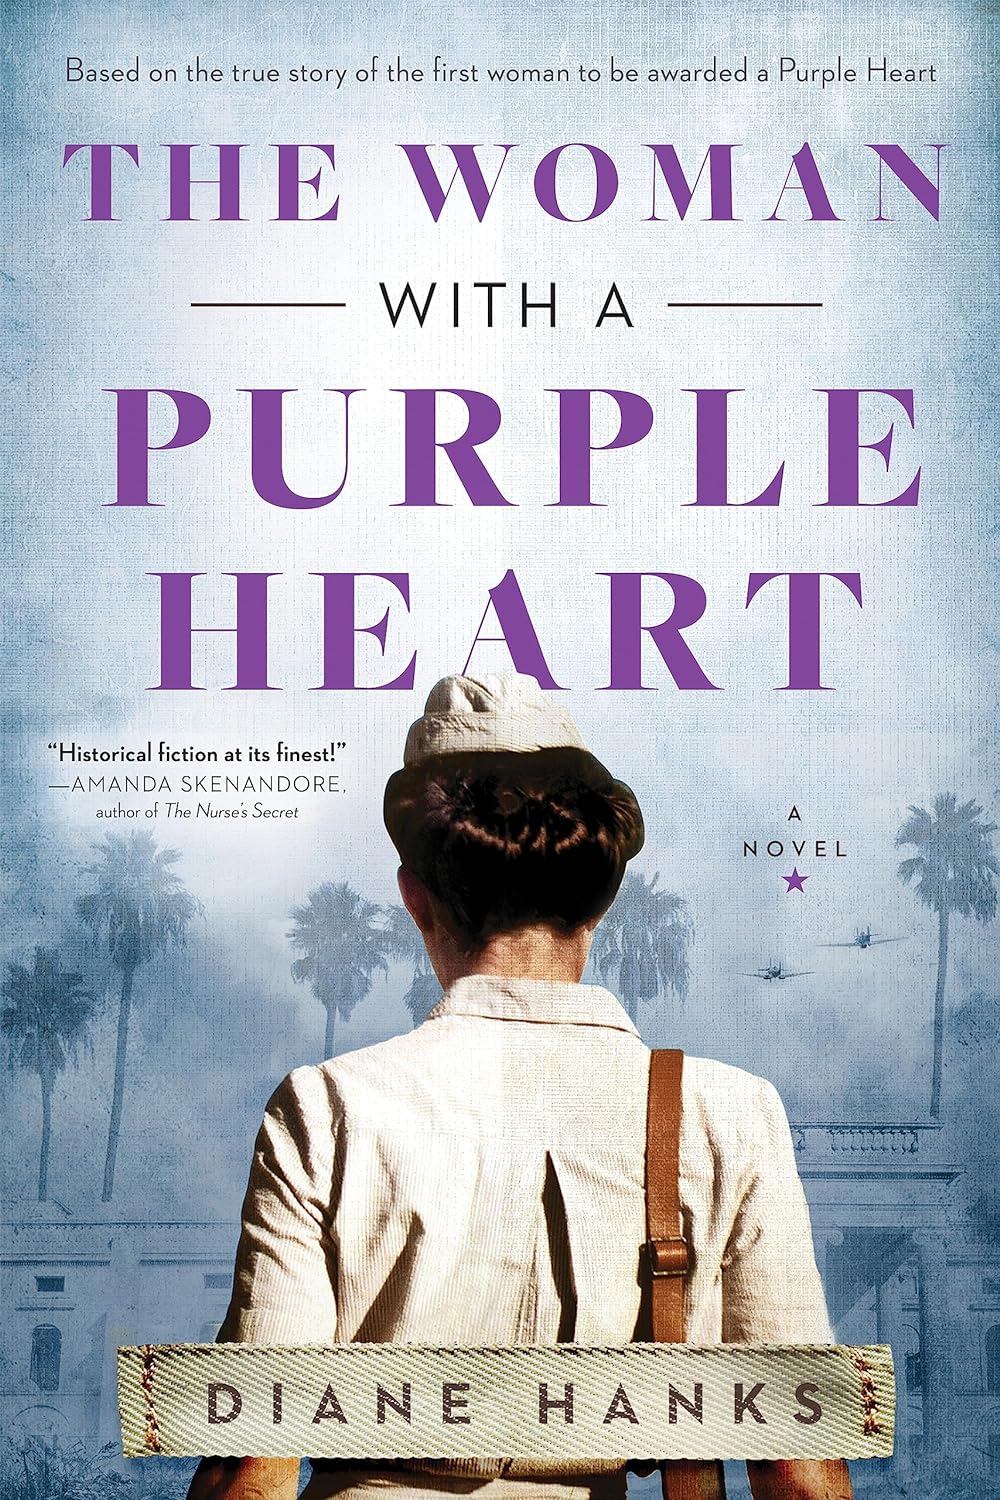 One of our recommended books is The Woman With a Purple Heart by Diane Hanks